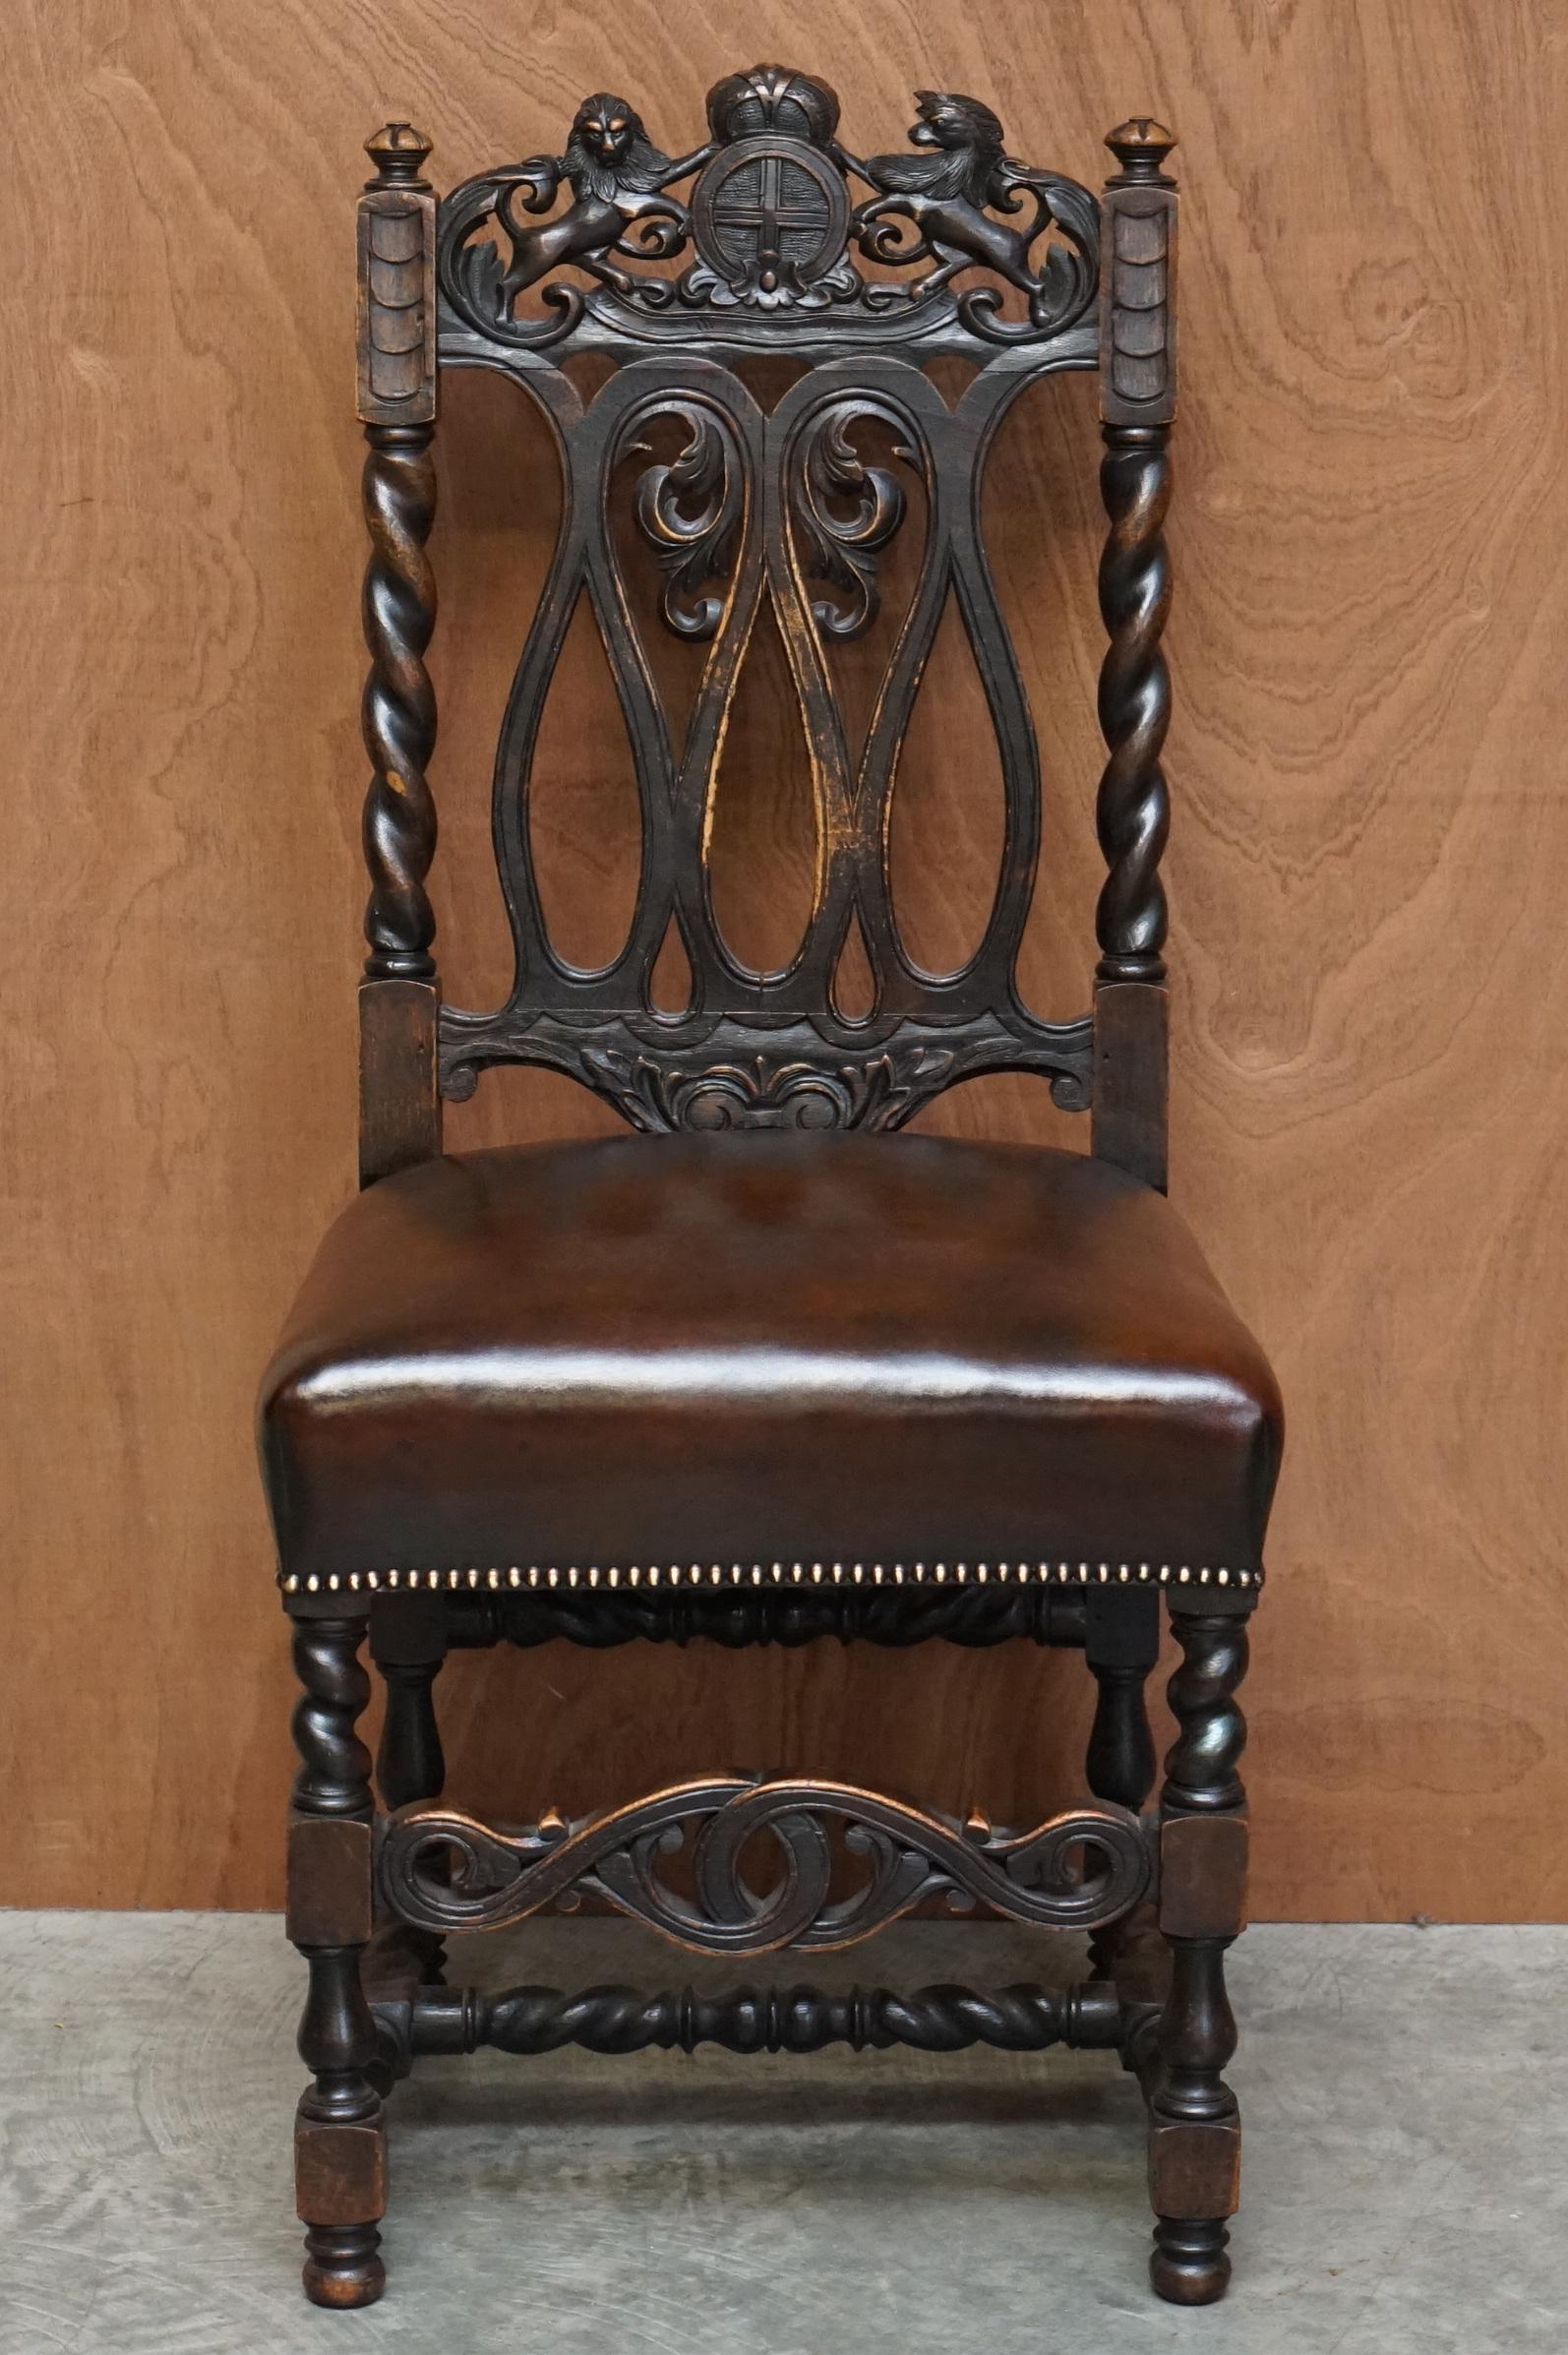 Hand-Crafted Eight Hand Carved Armorial Crest Coat of Arms Antique Jacobean Dining Chairs For Sale